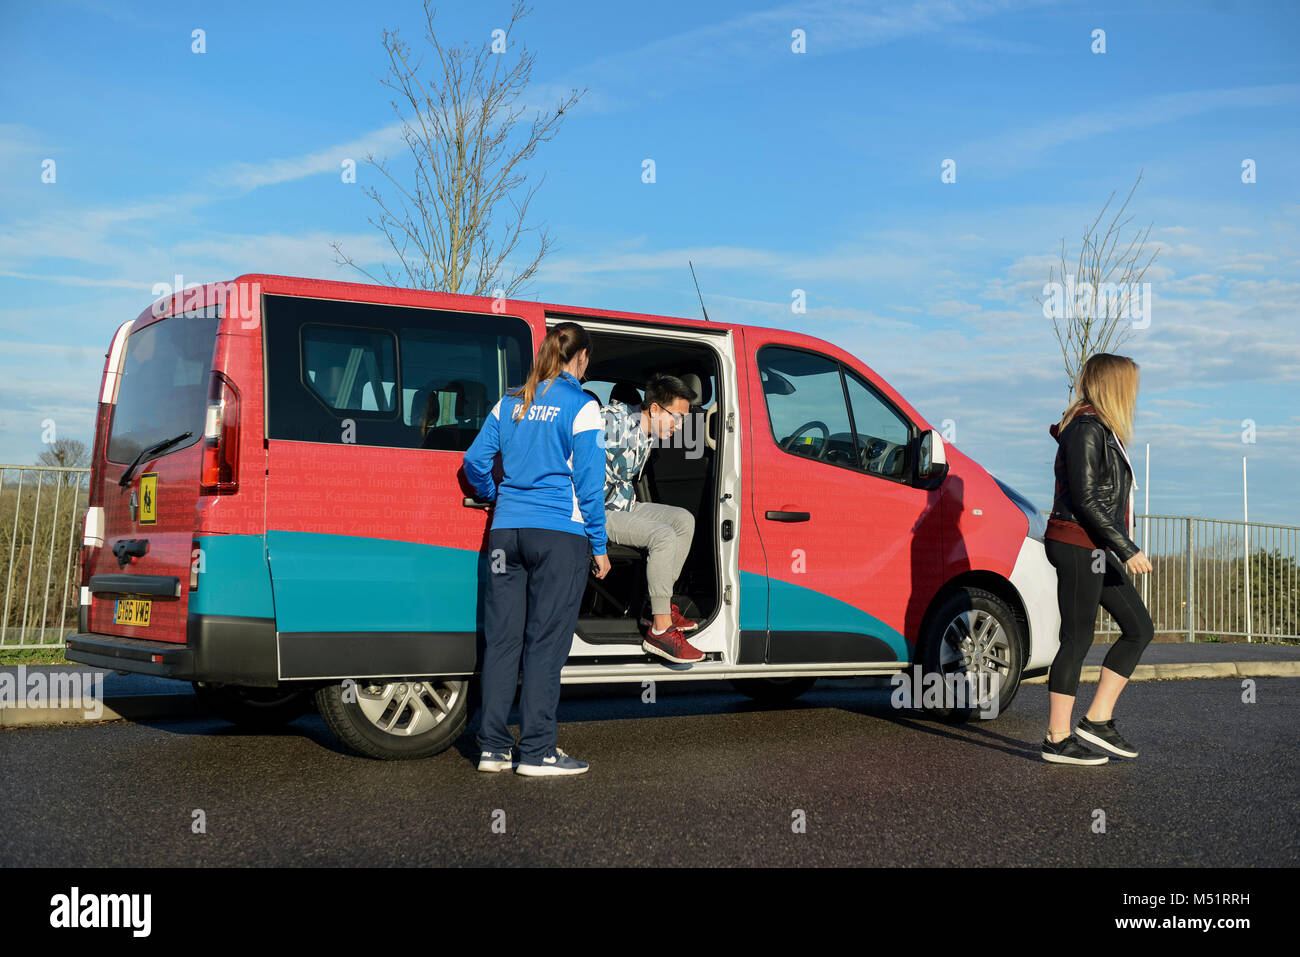 school college kids taking physical education / p.e. sports equipment out of the school van / mini bus before having a games / fitness lesson Stock Photo